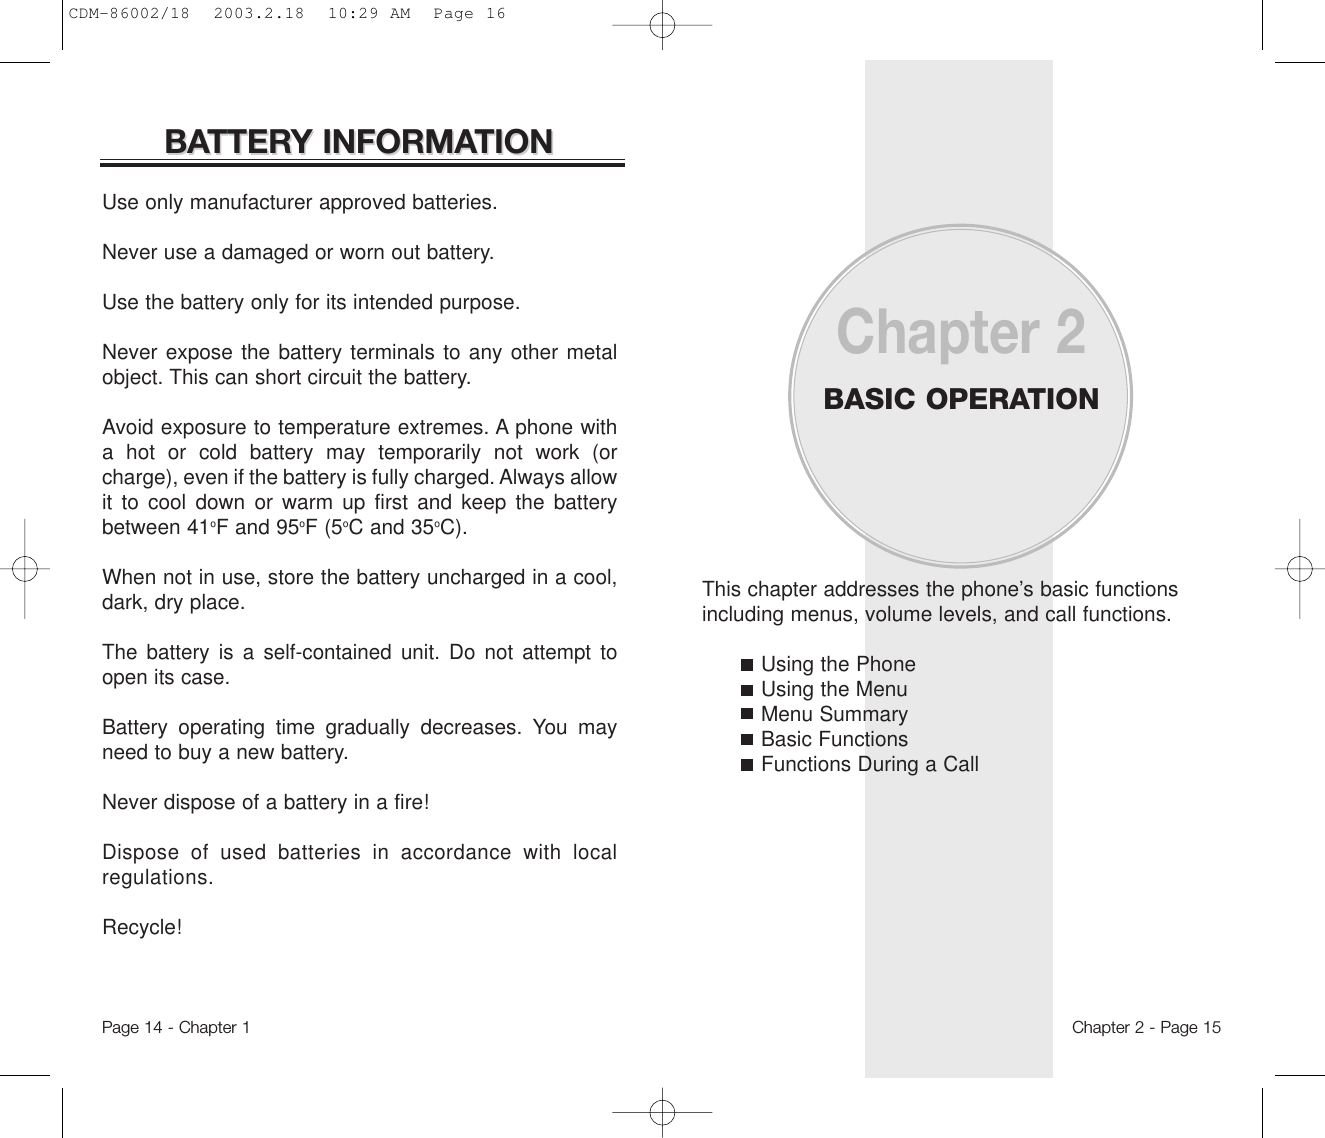 This chapter addresses the phone’s basic functionsincluding menus, volume levels, and call functions.Using the PhoneUsing the MenuMenu SummaryBasic FunctionsFunctions During a CallChapter 2BASIC OPERATIONChapter 2 - Page 15Use only manufacturer approved batteries.Never use a damaged or worn out battery.Use the battery only for its intended purpose.Never expose the battery terminals to any other metalobject. This can short circuit the battery. Avoid exposure to temperature extremes. A phone witha hot or cold battery may temporarily not work (orcharge), even if the battery is fully charged. Always allowit to cool down or warm up first and keep the batterybetween 41oF and 95oF (5oC and 35oC). When not in use, store the battery uncharged in a cool,dark, dry place.The battery is a self-contained unit. Do not attempt toopen its case.Battery operating time gradually decreases. You mayneed to buy a new battery.Never dispose of a battery in a fire!Dispose of used batteries in accordance with localregulations.Recycle!BABATTERTTERY INFORMAY INFORMATIONTIONPage 14 - Chapter 1CDM-86002/18  2003.2.18  10:29 AM  Page 16